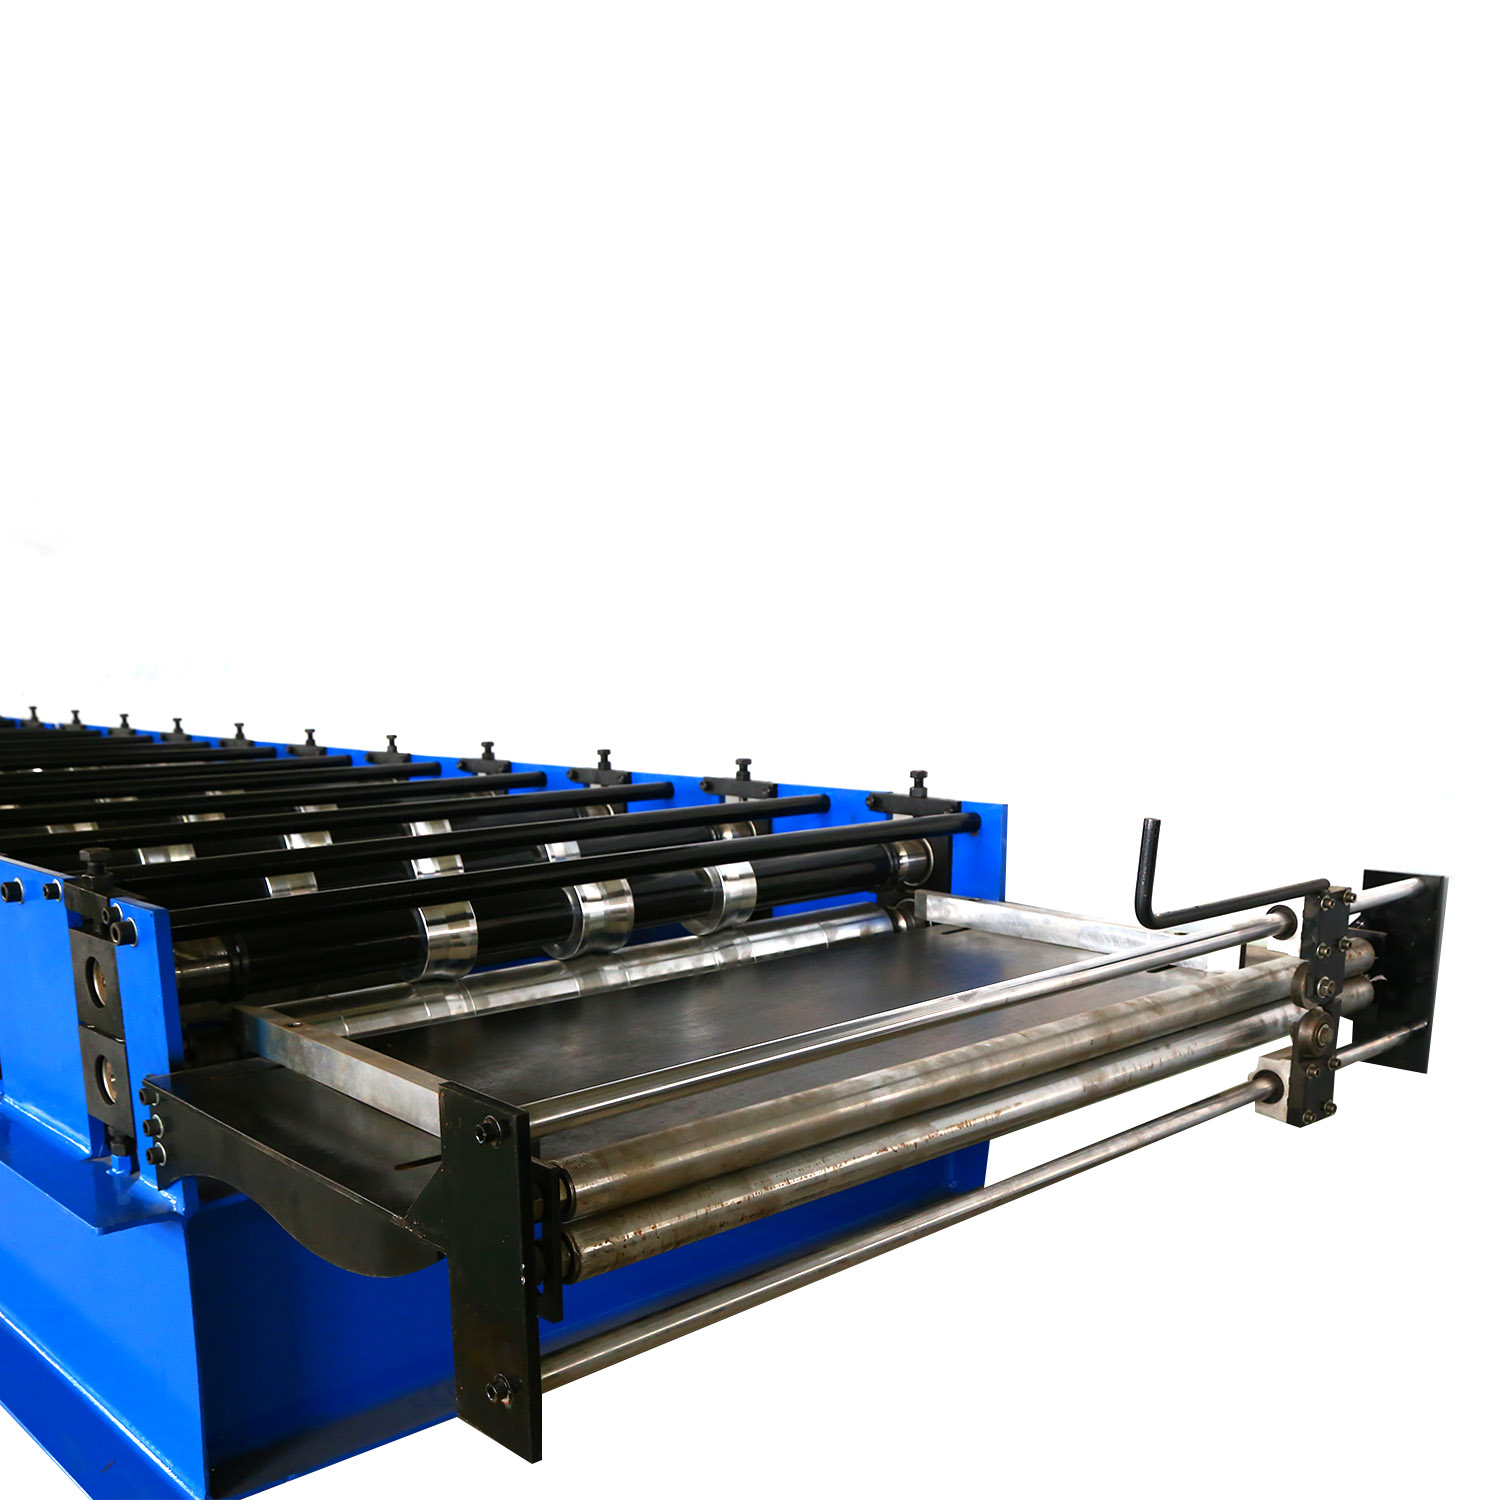 New IBR Trapezoid 4 metal roofing tiles making machine roofing sheet making machinery/roll forming machine manifaqcturfer